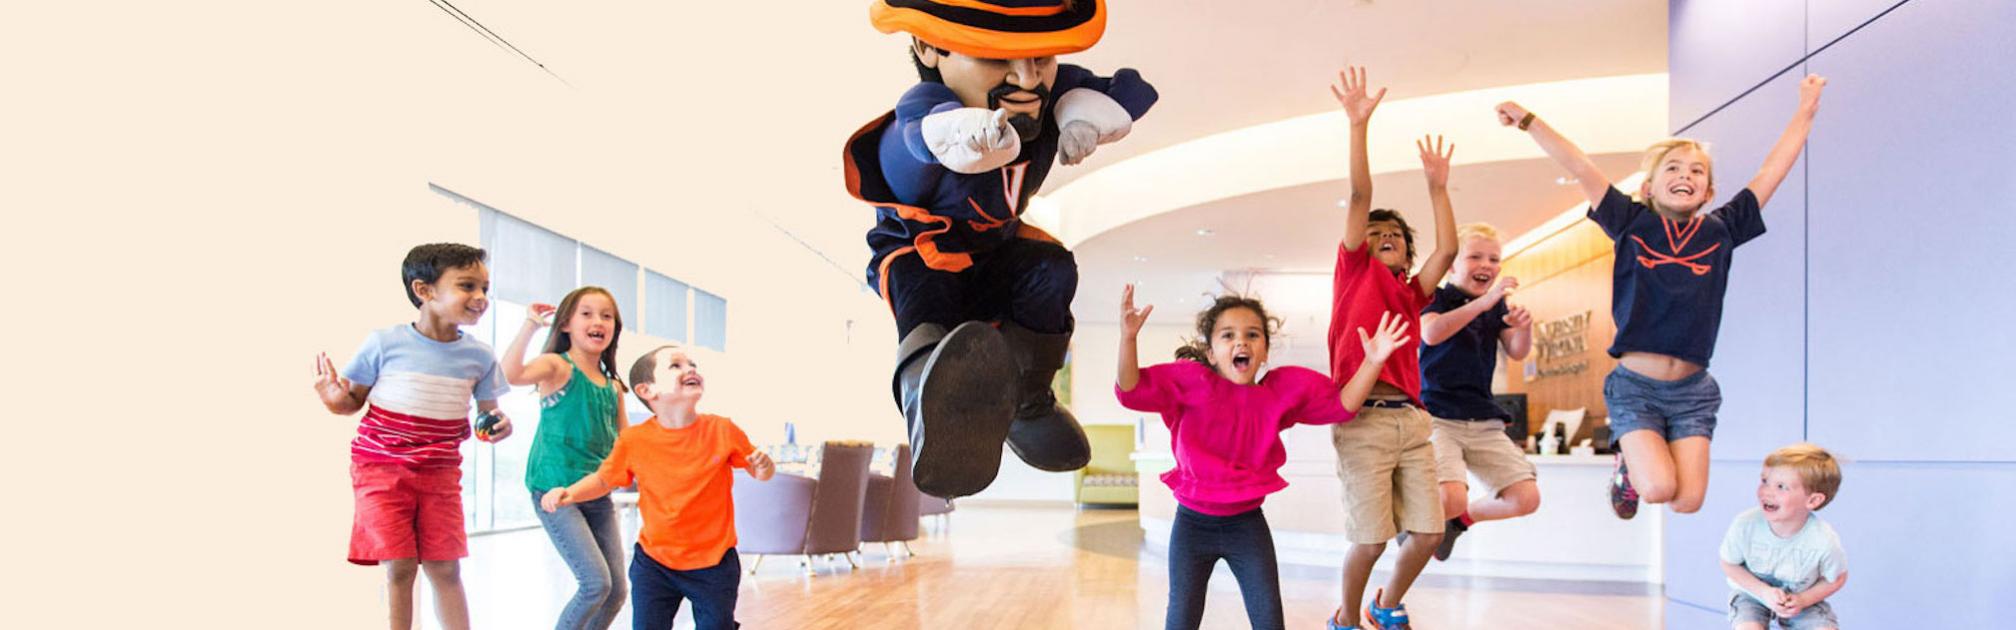 Patients at UVA Health Children's hospital jump in the air with UVA mascot Cav man.